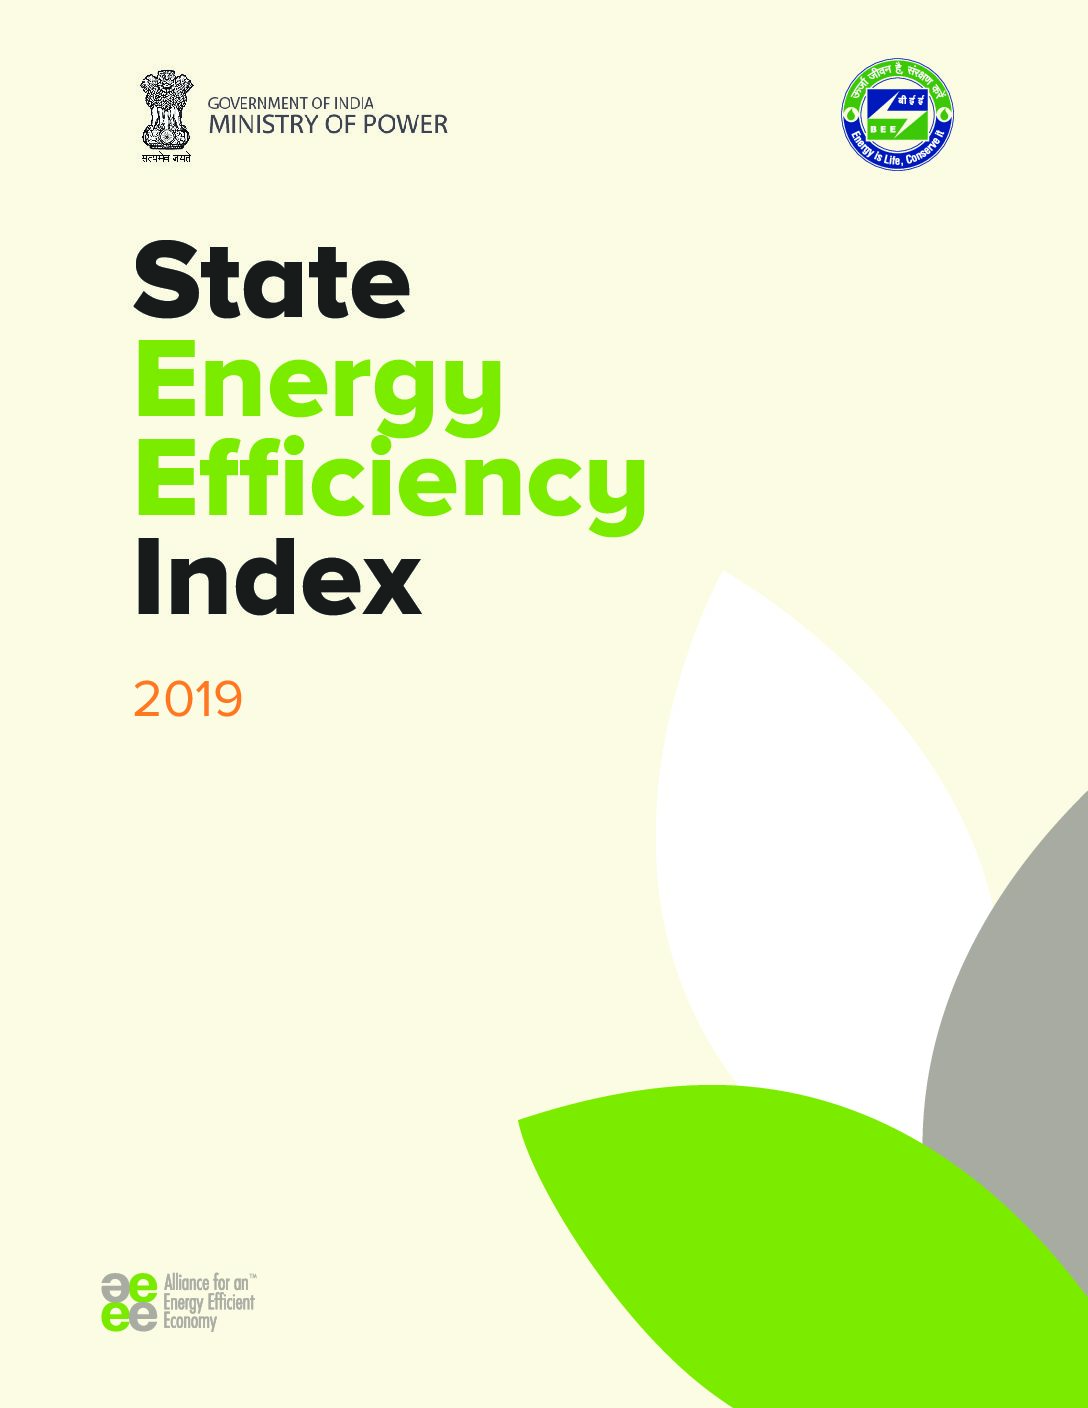 State energy